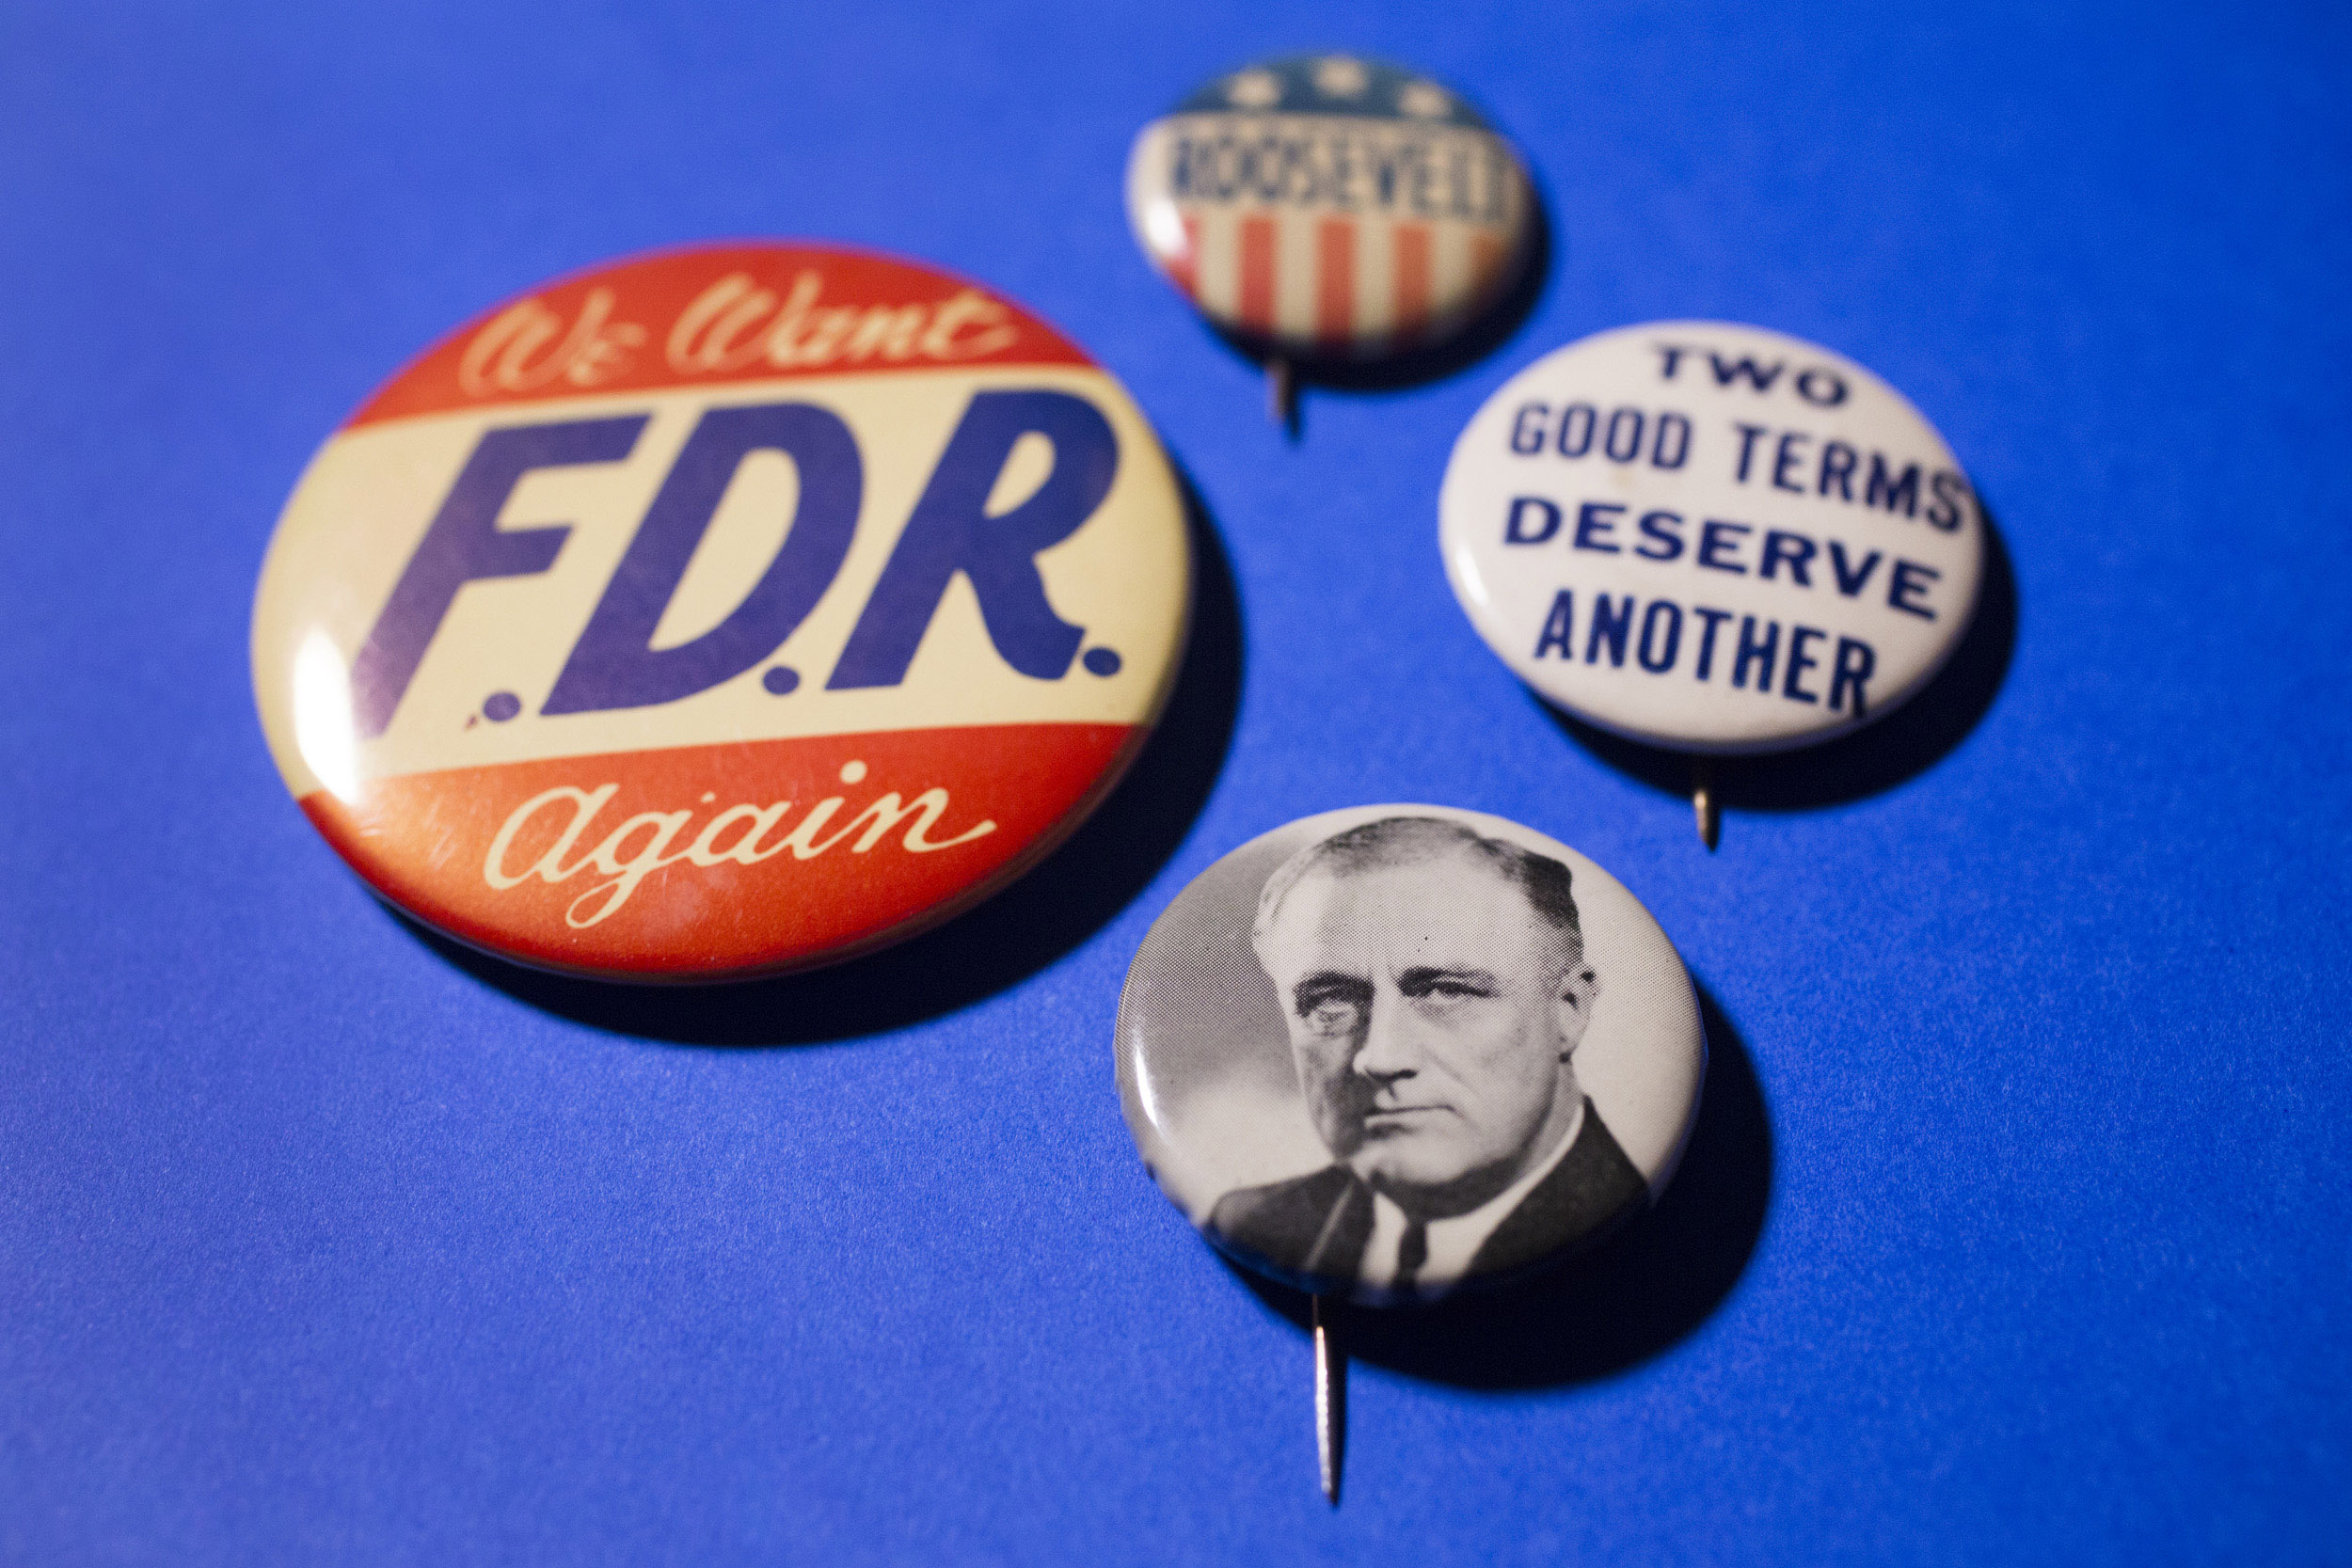 Campaign buttons for Franklin Delano Roosevelt, the only U.S. president to serve more than two terms.